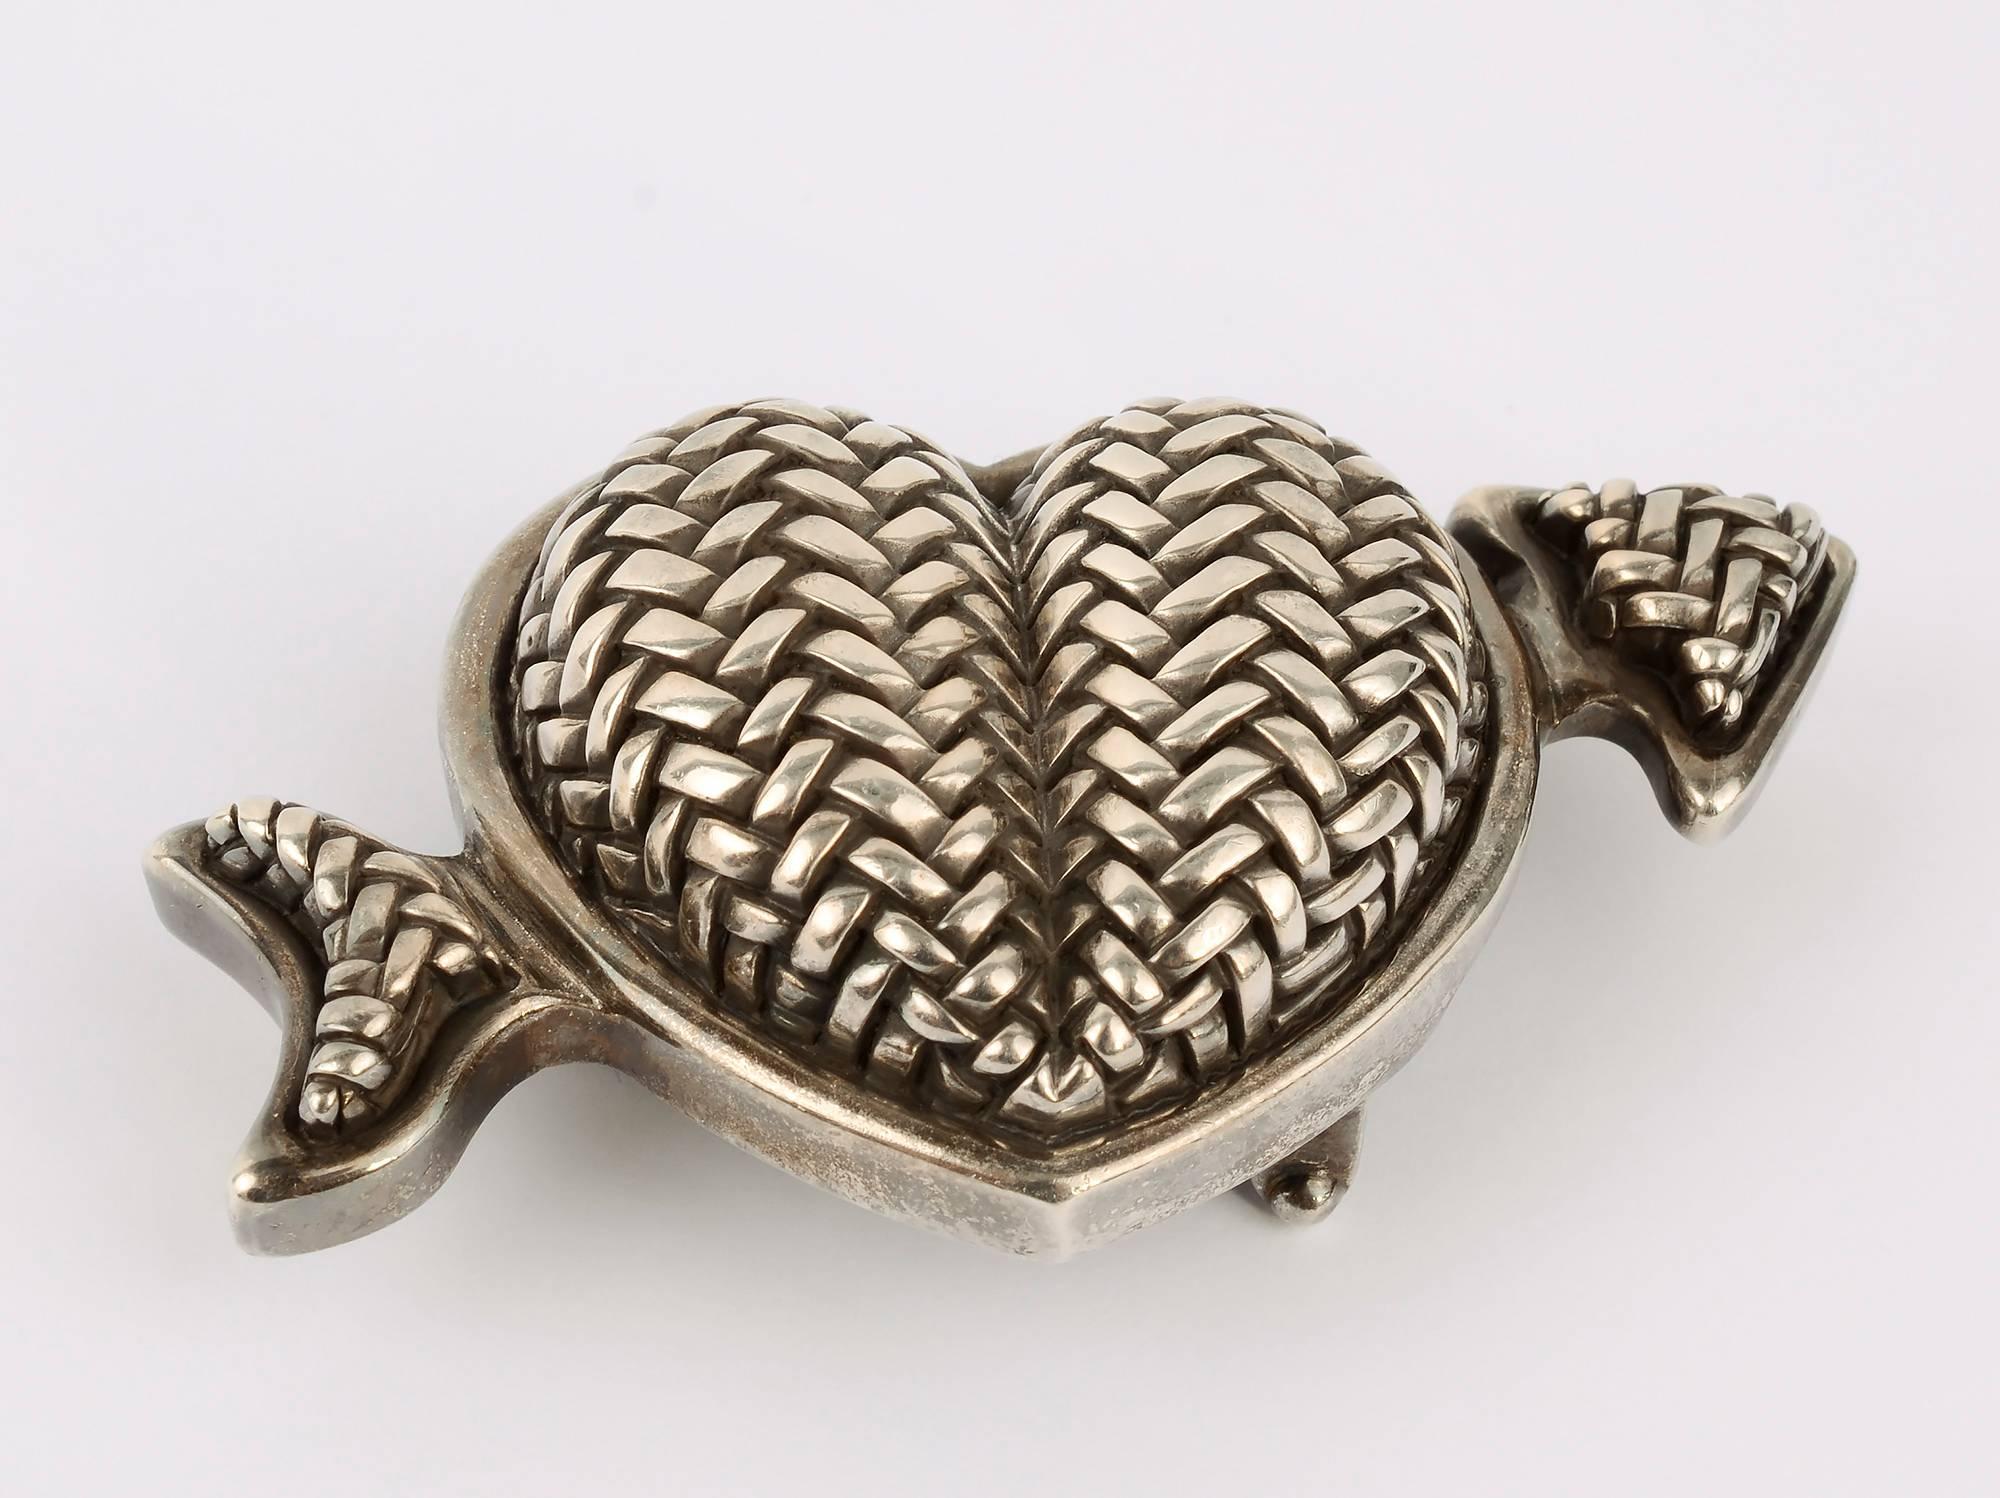 Barry Kieselstein Cord sterling silver belt buckle of a heart with an arrow going through. It is dated 1997. The buckle is wonderfully three dimensional and textured with a herringbone design. It measures 1 3/4 inches tall and 3 1/4 inches across